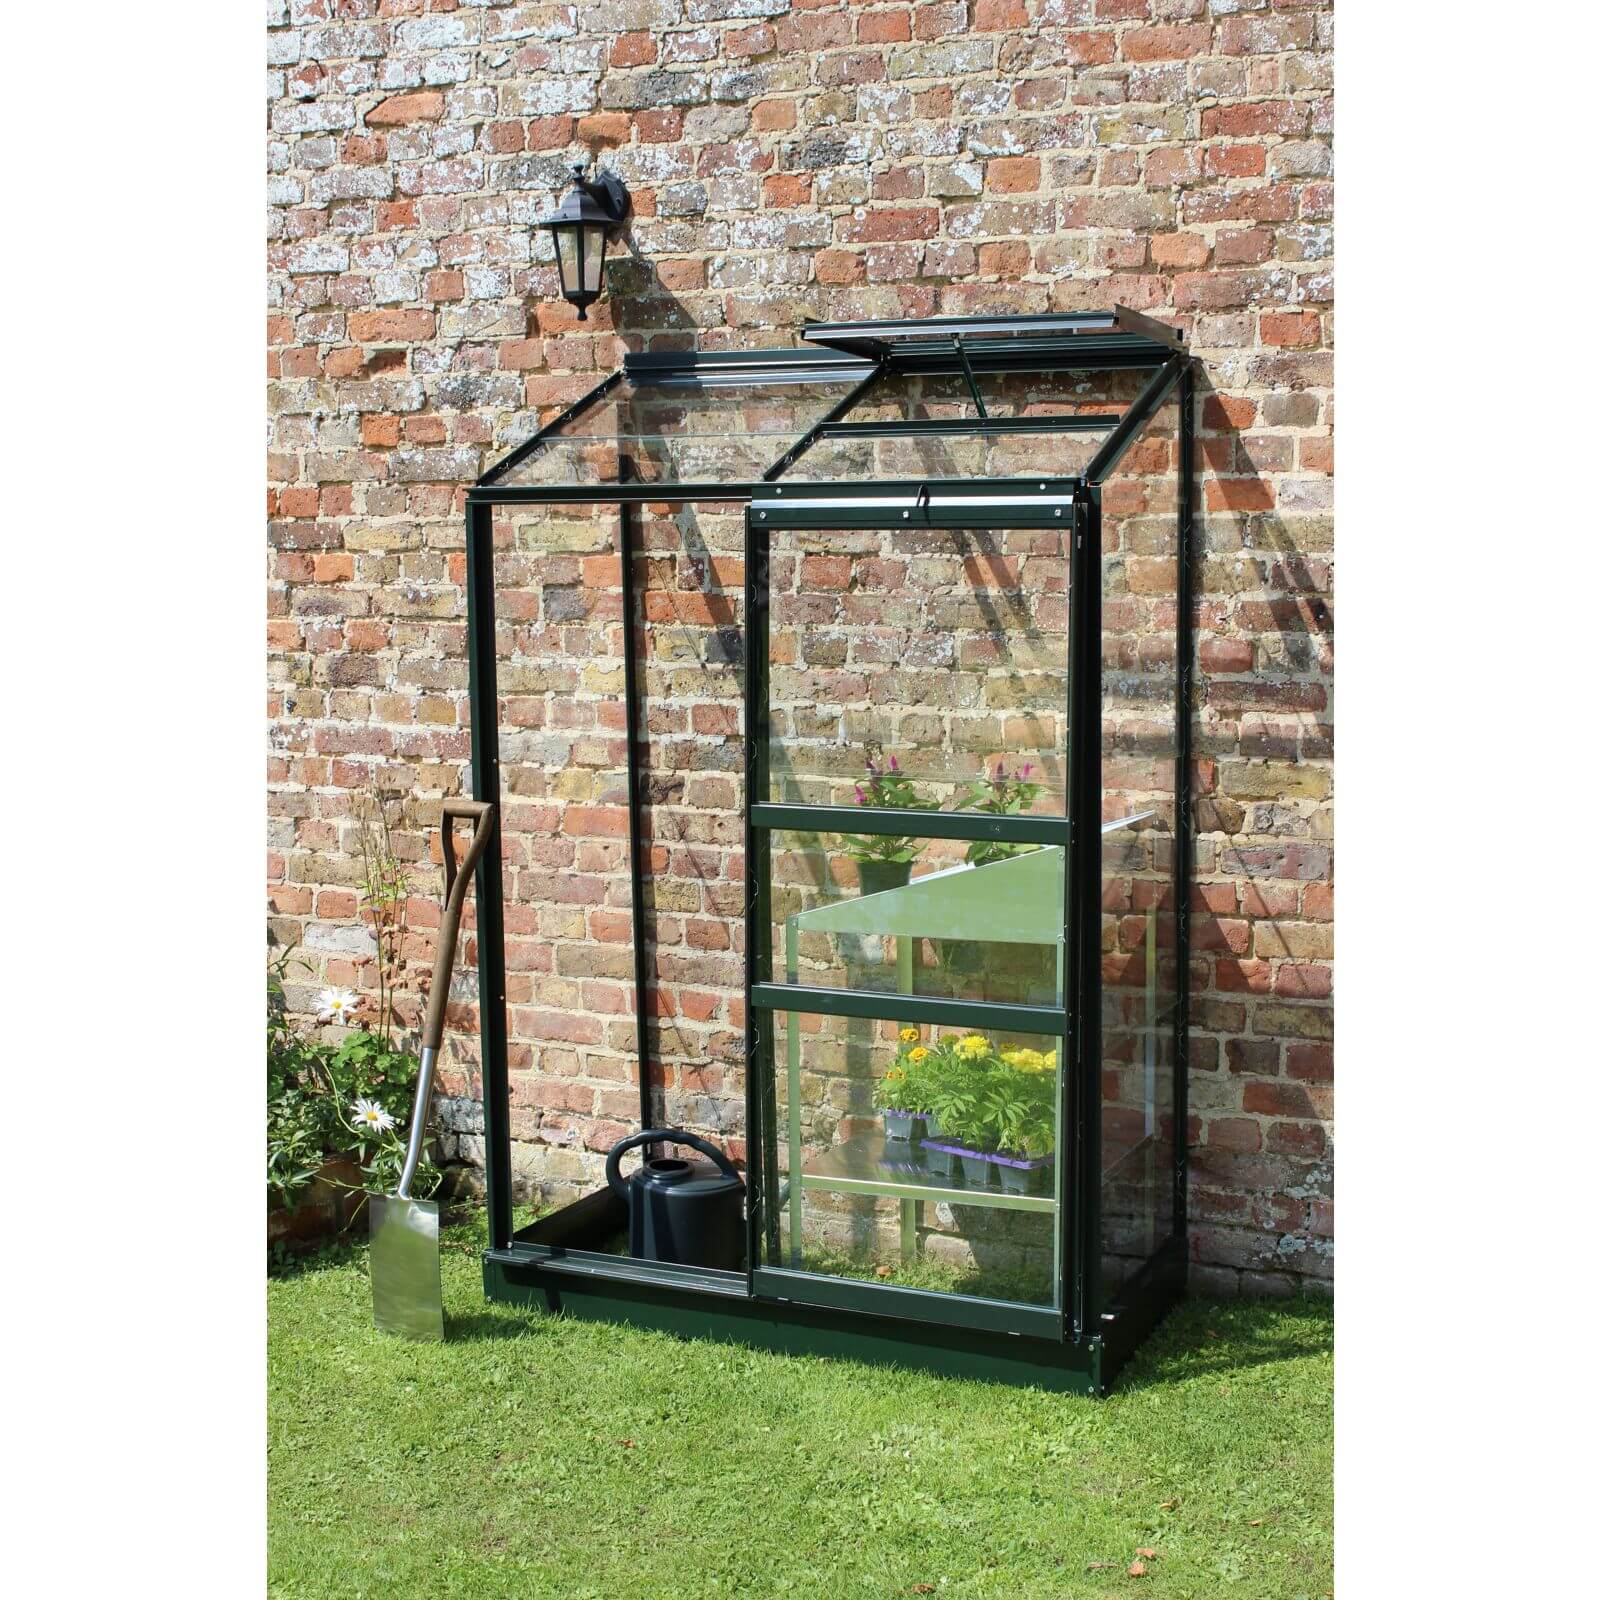 Halls Wall Garden 24 Aluminium Greenhouse with Horticultural Glass & Base - Green